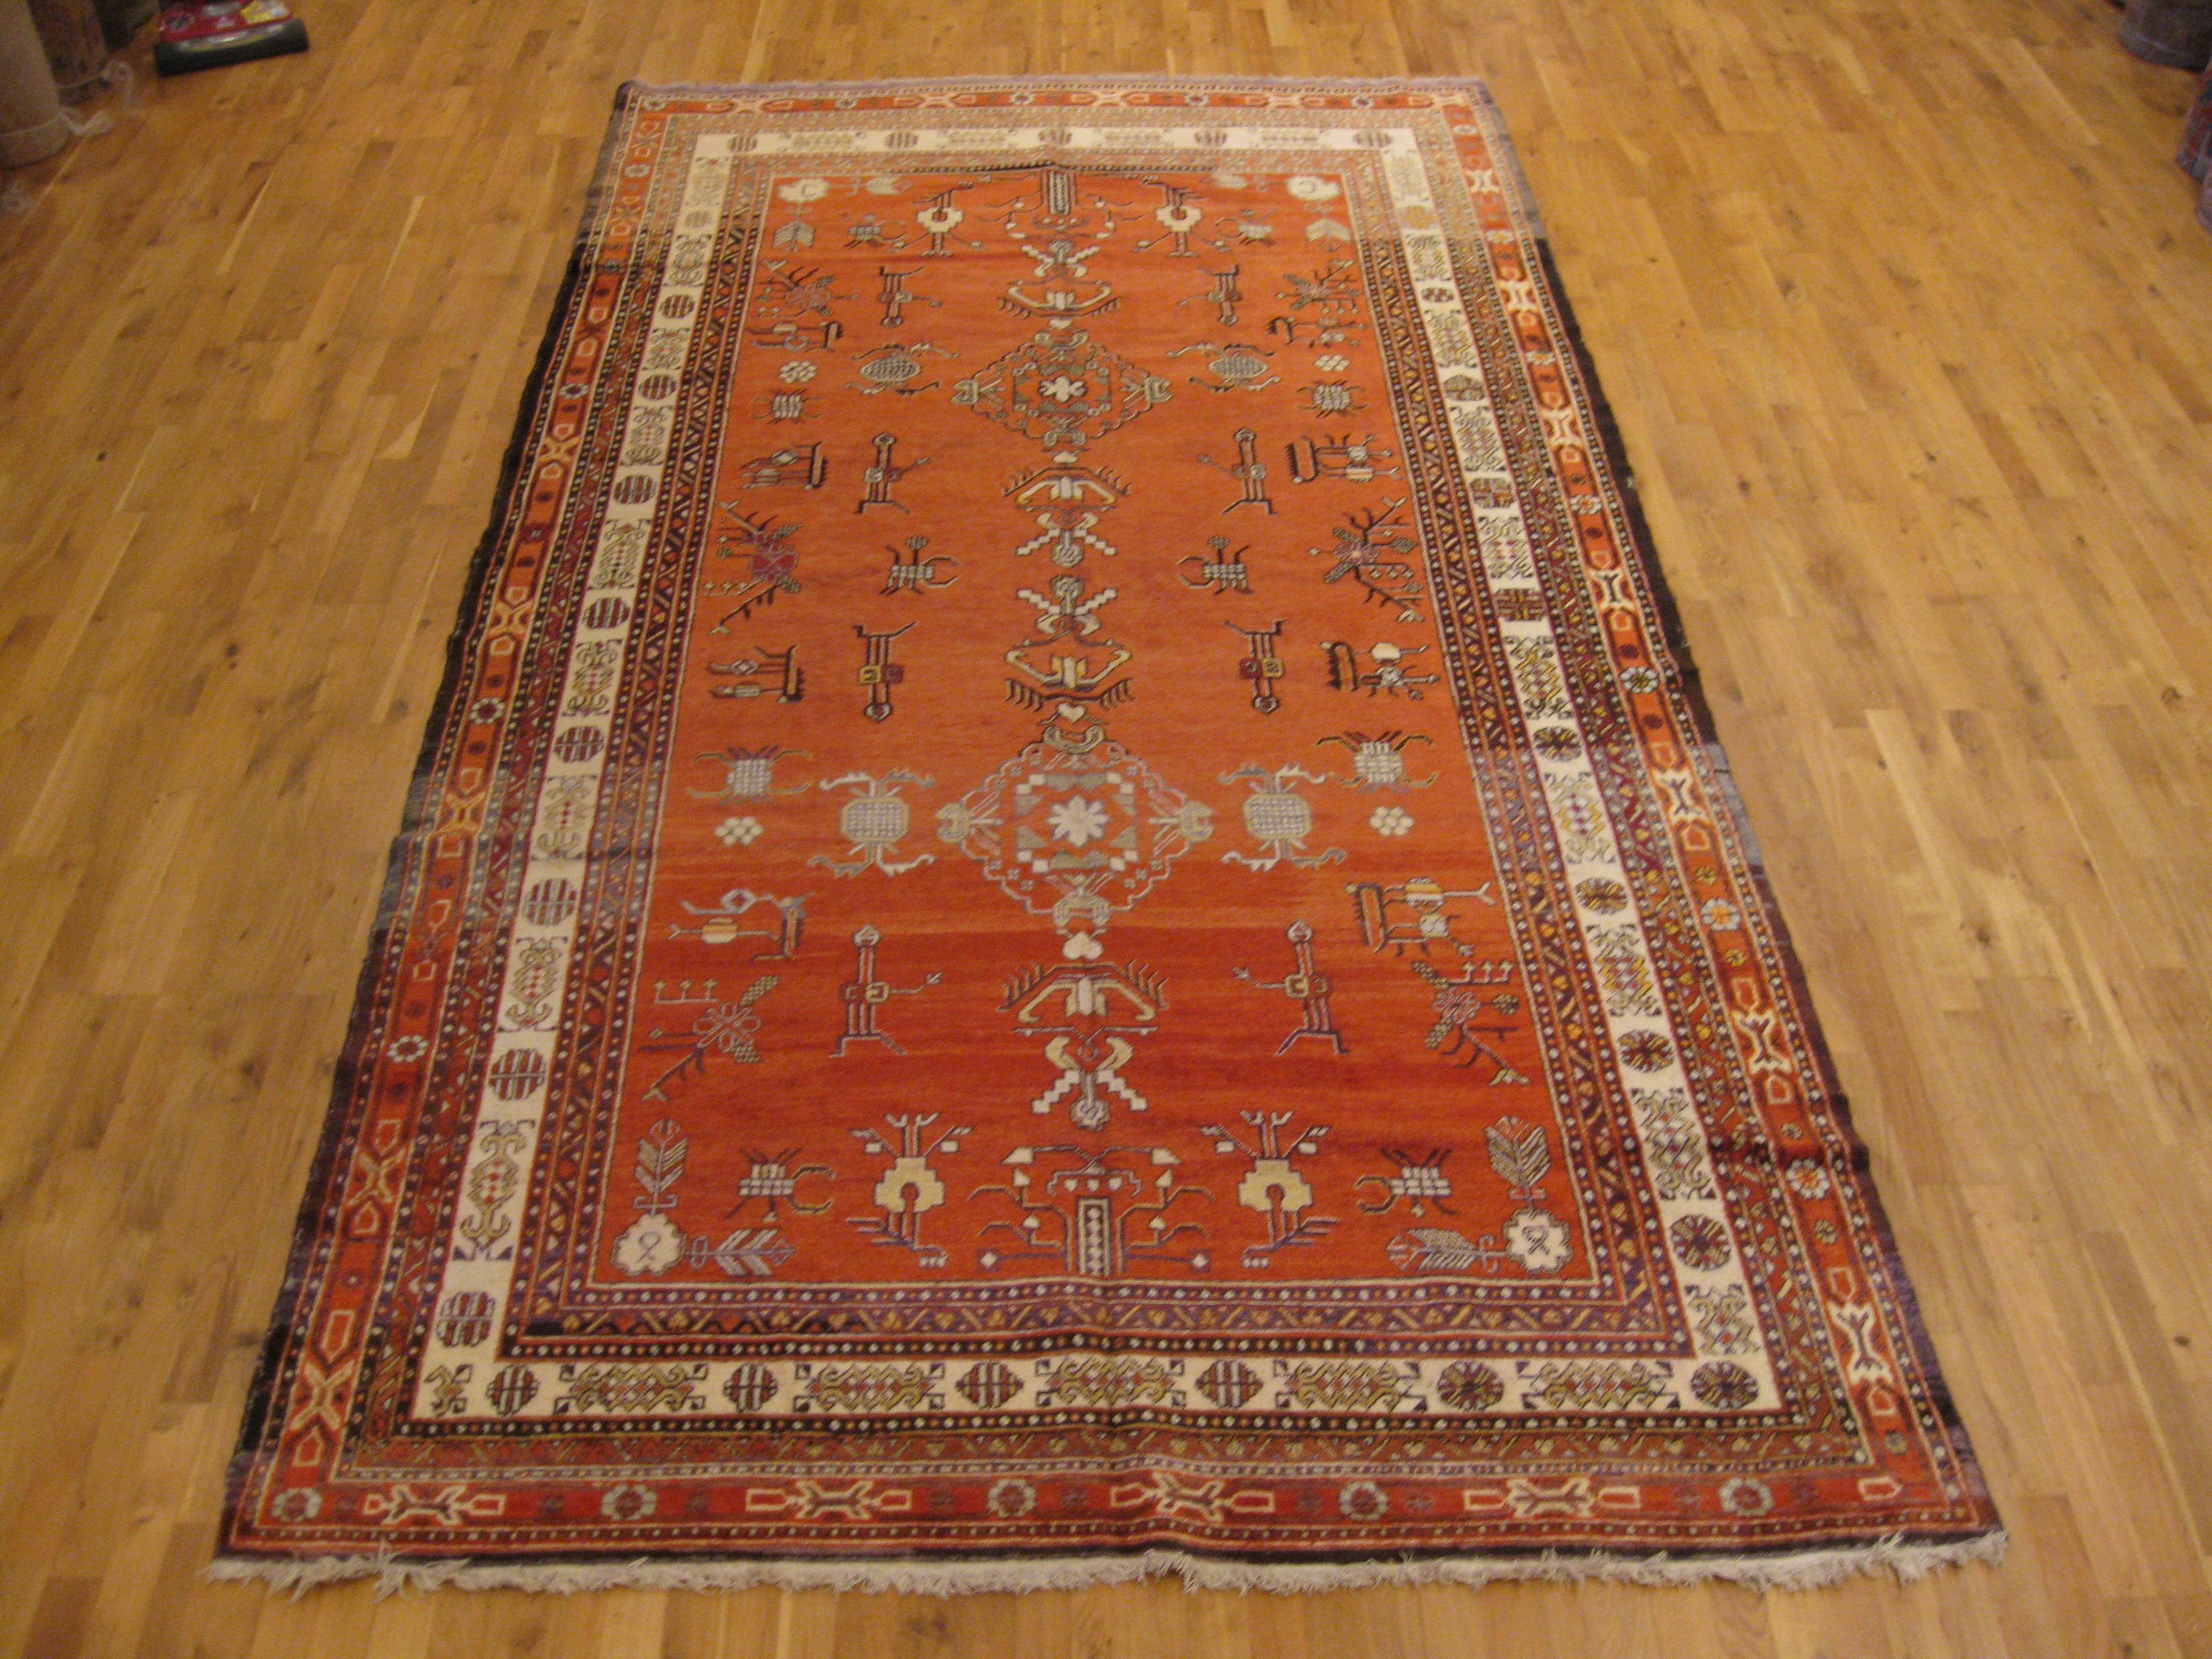 Given its origins as an ancient silk road oasis, it’s no surprise that rugs from of Khotan (in northwestern China) feature an intriguing mix of Chinese, Central Asian and Western colors and design elements. Very versatile pieces, they work well in